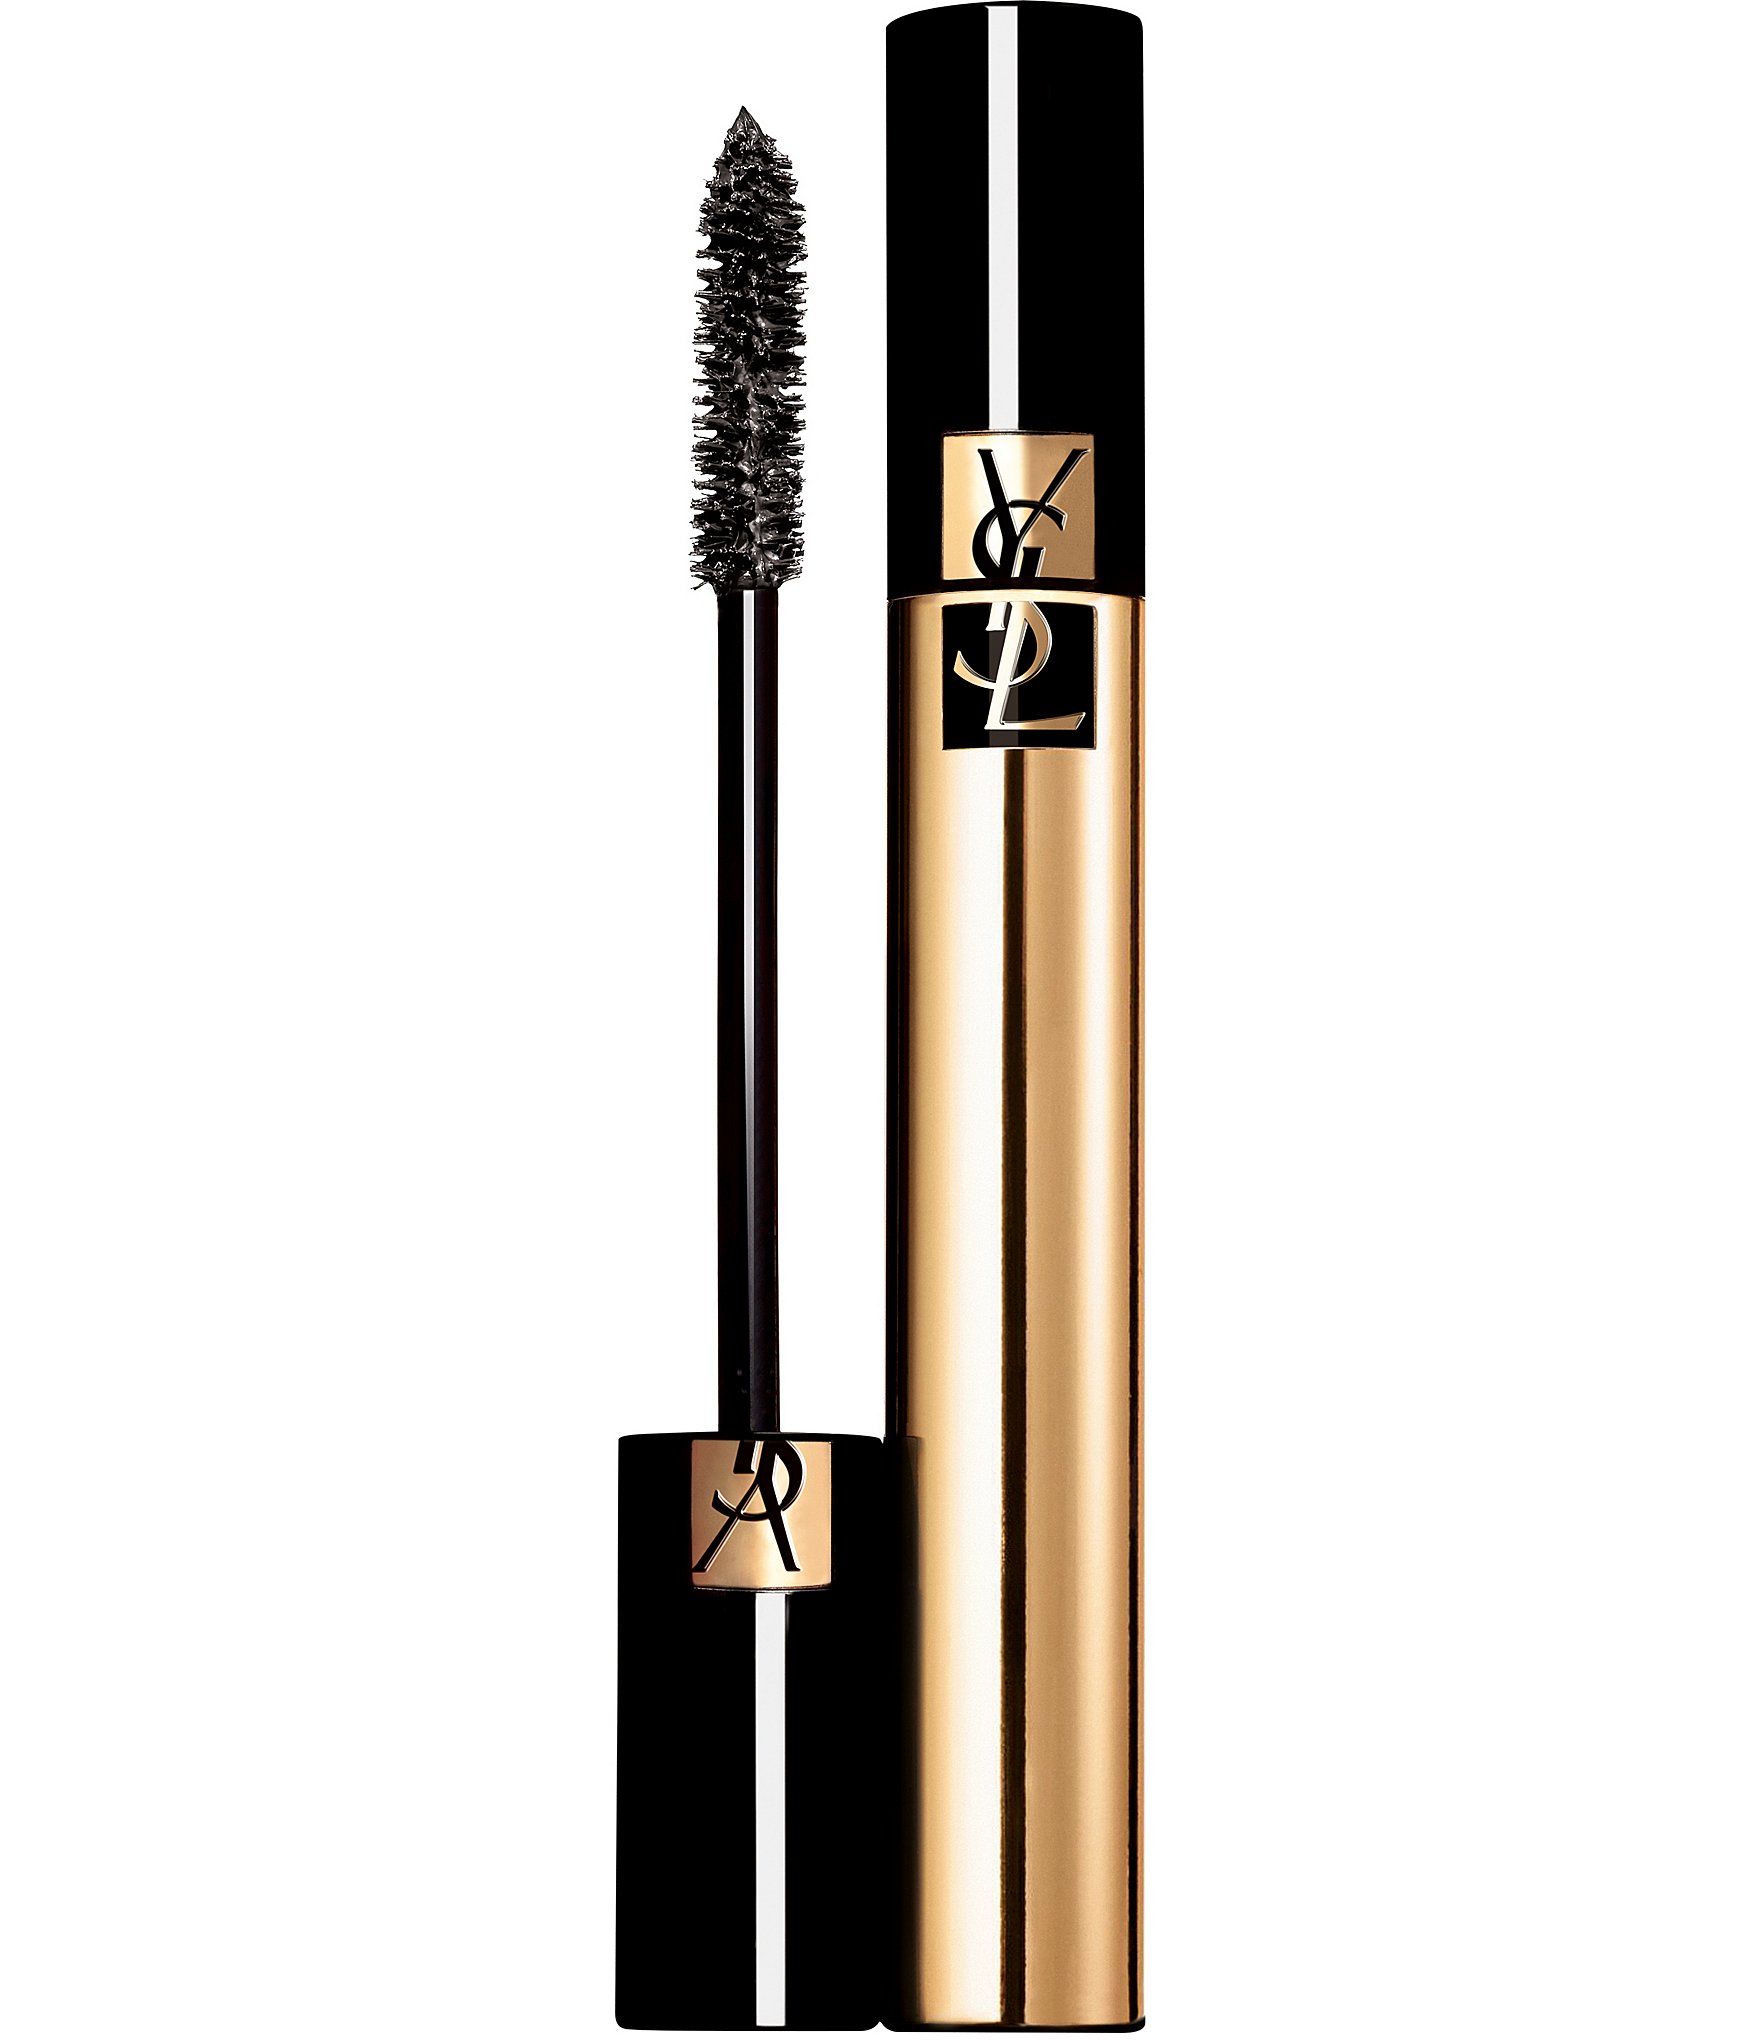 YSL Mascara Volume Effet Faux Cils and The Slim Lipstick Duo RRP £59 BOXED